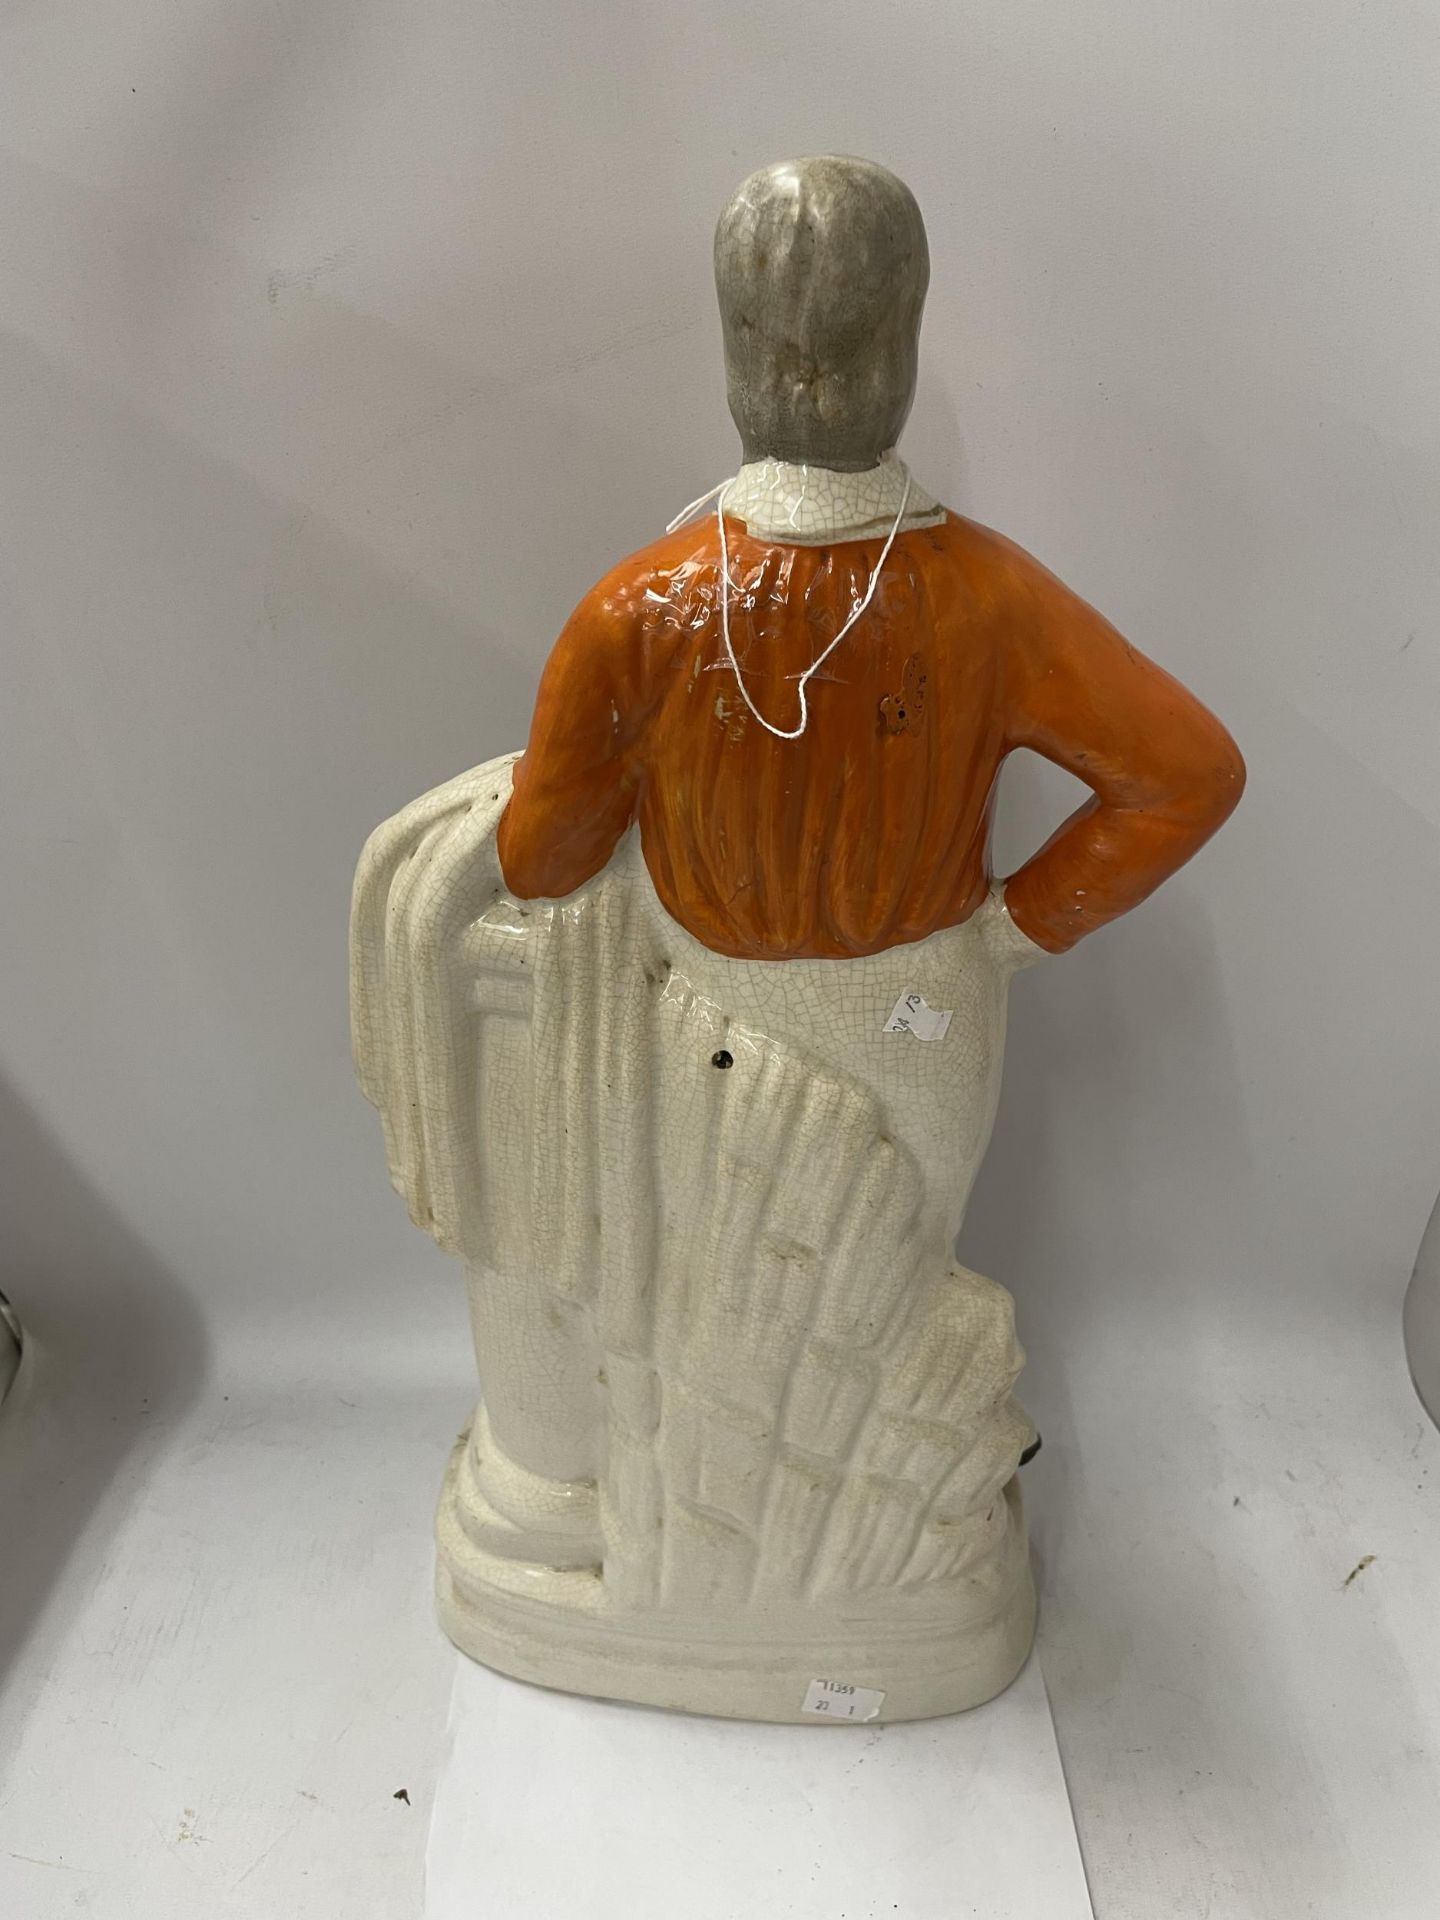 A LARGE STAFFORDSHIRE POTTERY FIGURE OF GARIBALDI HEIGHT 48CM - Image 3 of 3